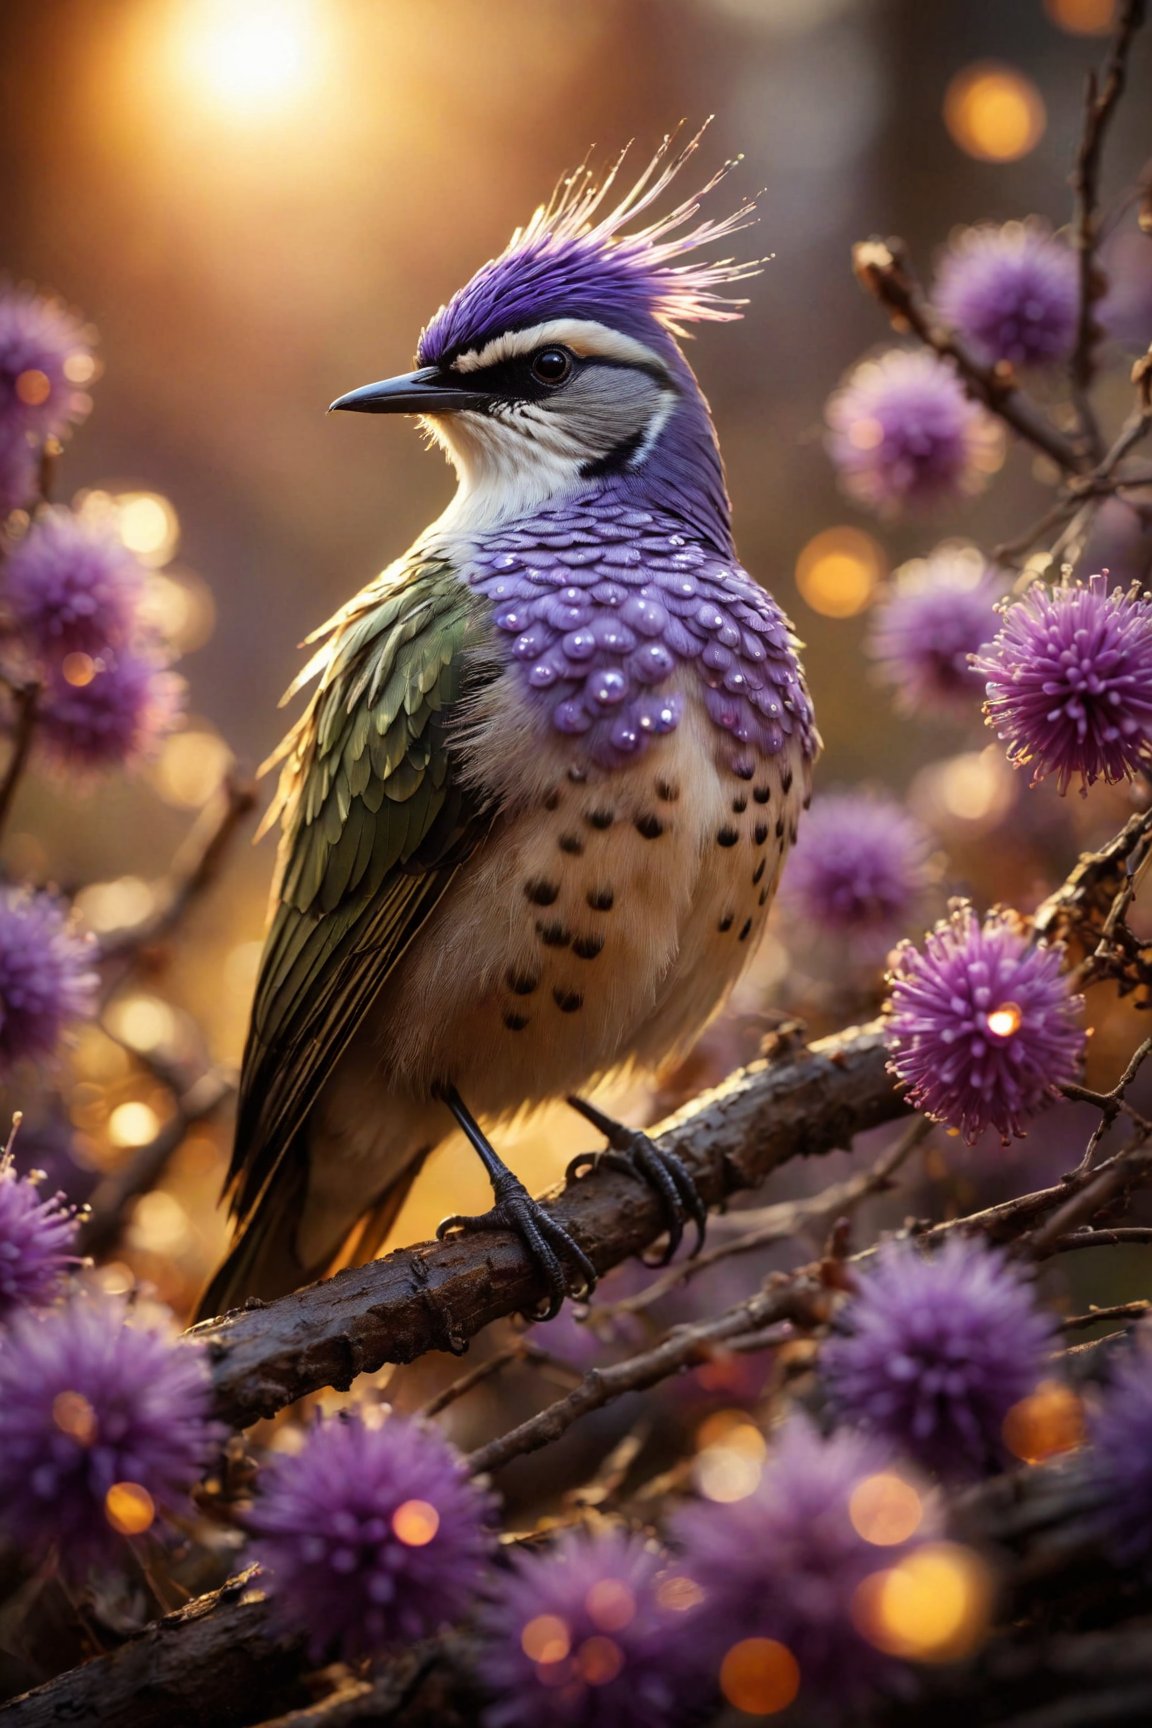 A breathtaking masterpiece showcasing a gorgeous little Violet-crowned nymph bathed in soft, golden morning light, surrounded by vibrant bokeh balls that frame its delicate form. The image will be rendered in sharp detail, capturing every feather and intricate feature of the bird with stunning clarity. The soft, diffused lighting will enhance the warmth and radiance of its plumage, while high-quality bokeh adds a magical touch to the scene. Multiple image exposures will be expertly combined to emphasize the bird's vibrant colors and captivating gaze, resulting in a lifelike portrayal of tranquil beauty